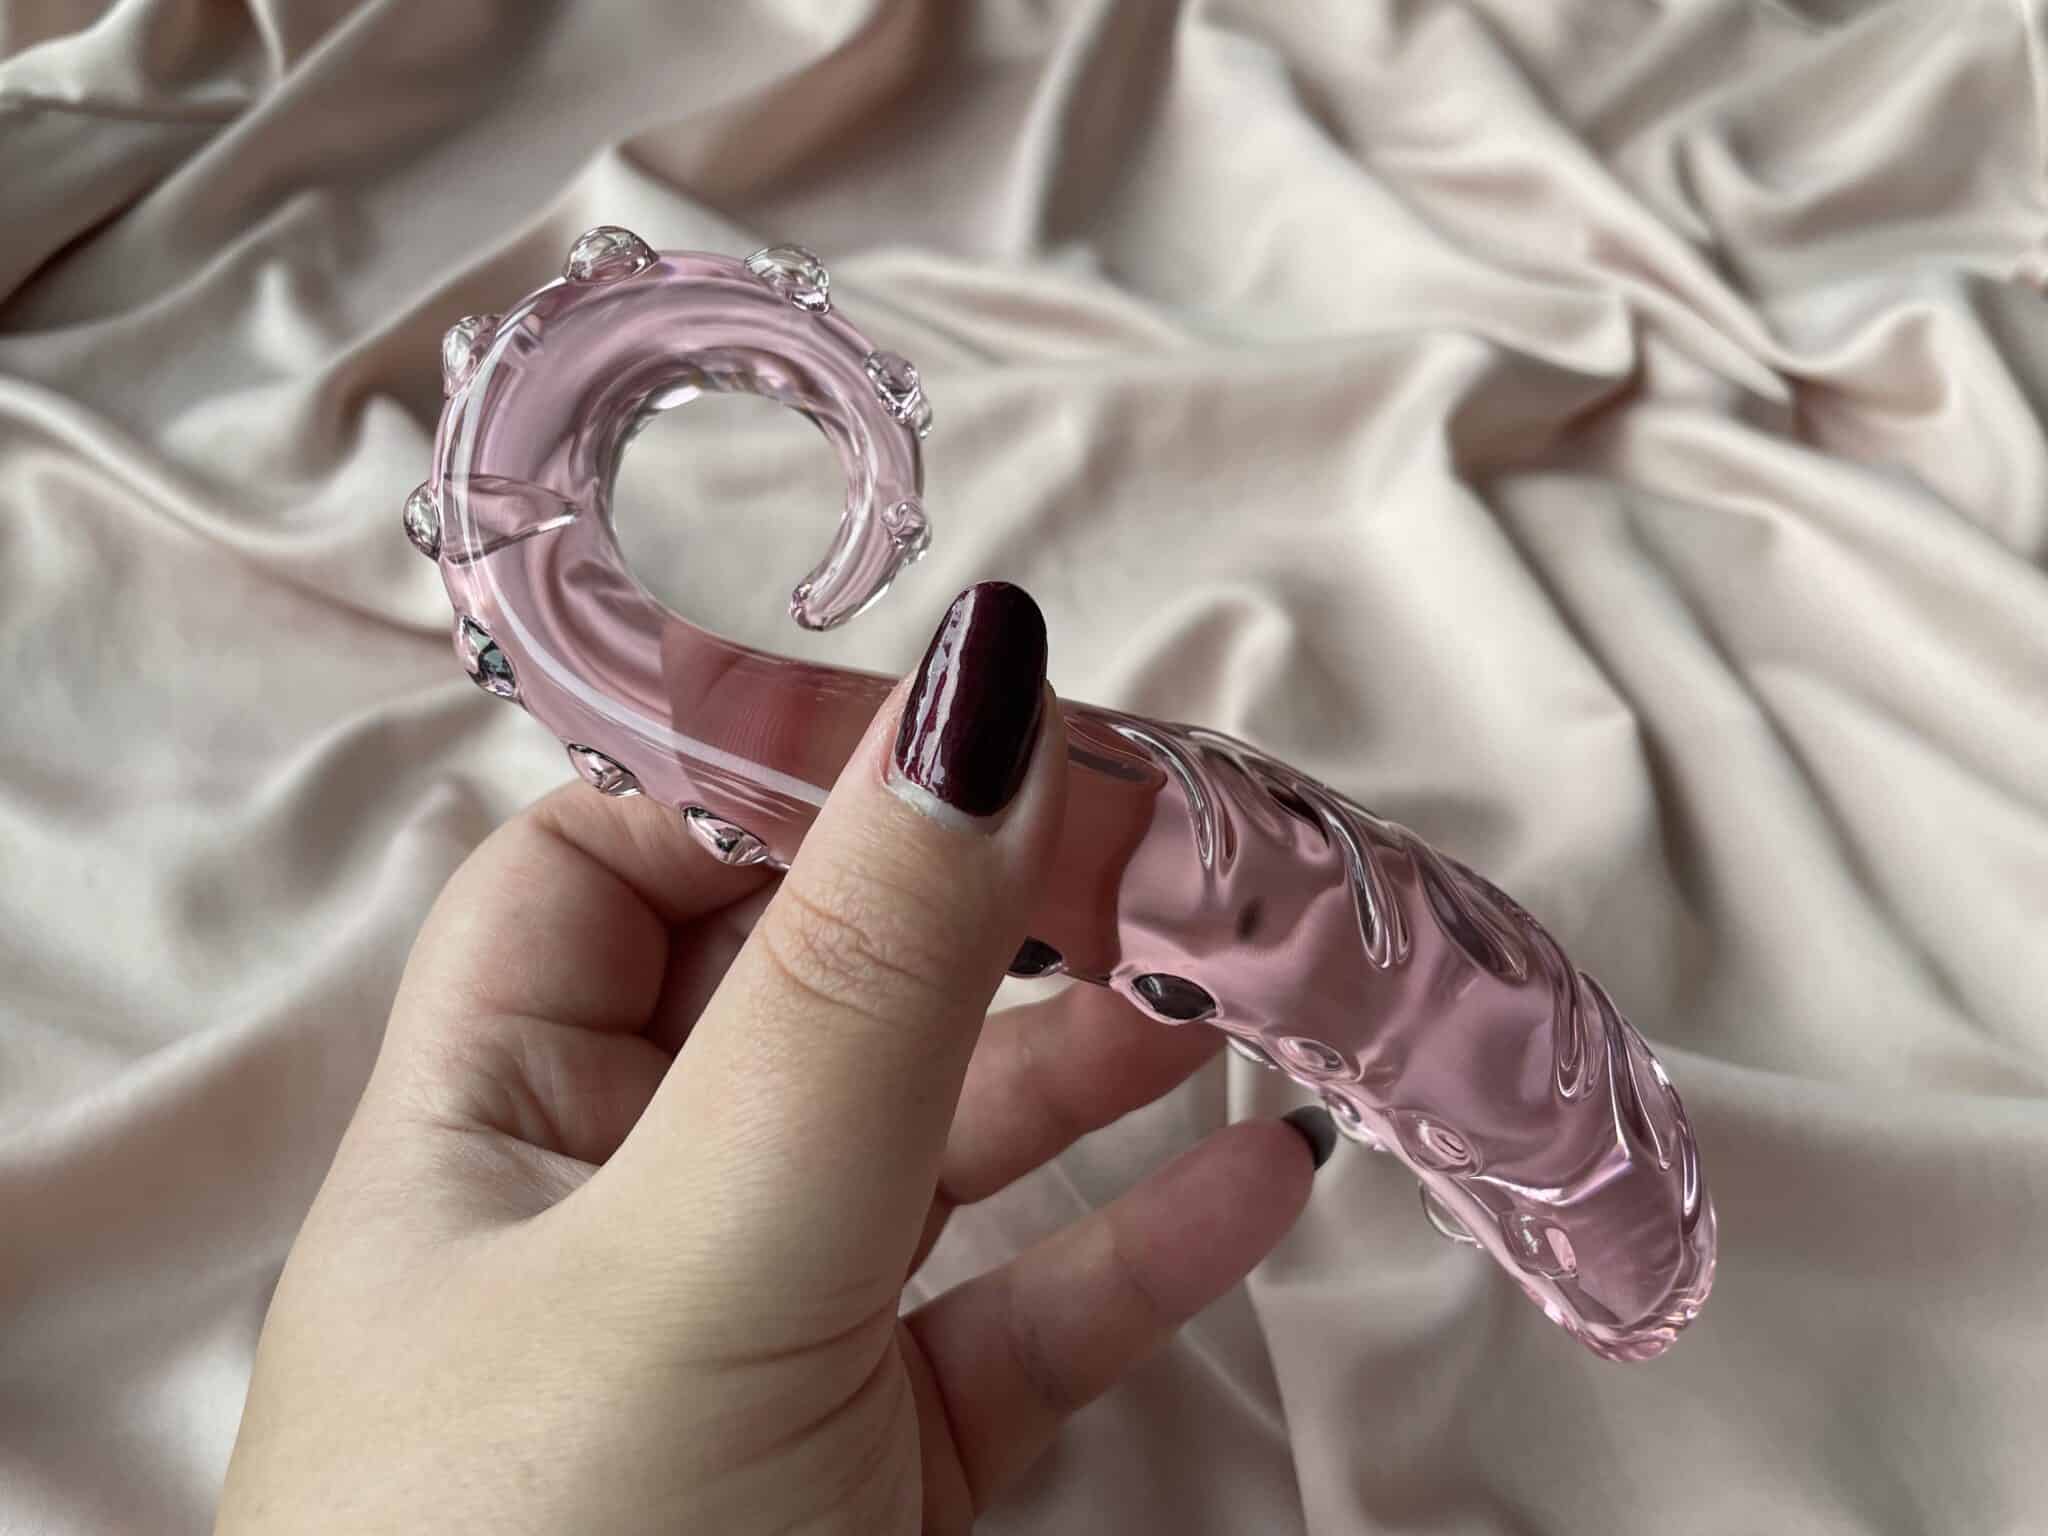 My Personal Experiences with Icicles No. 24 Glass Tentacle Dildo